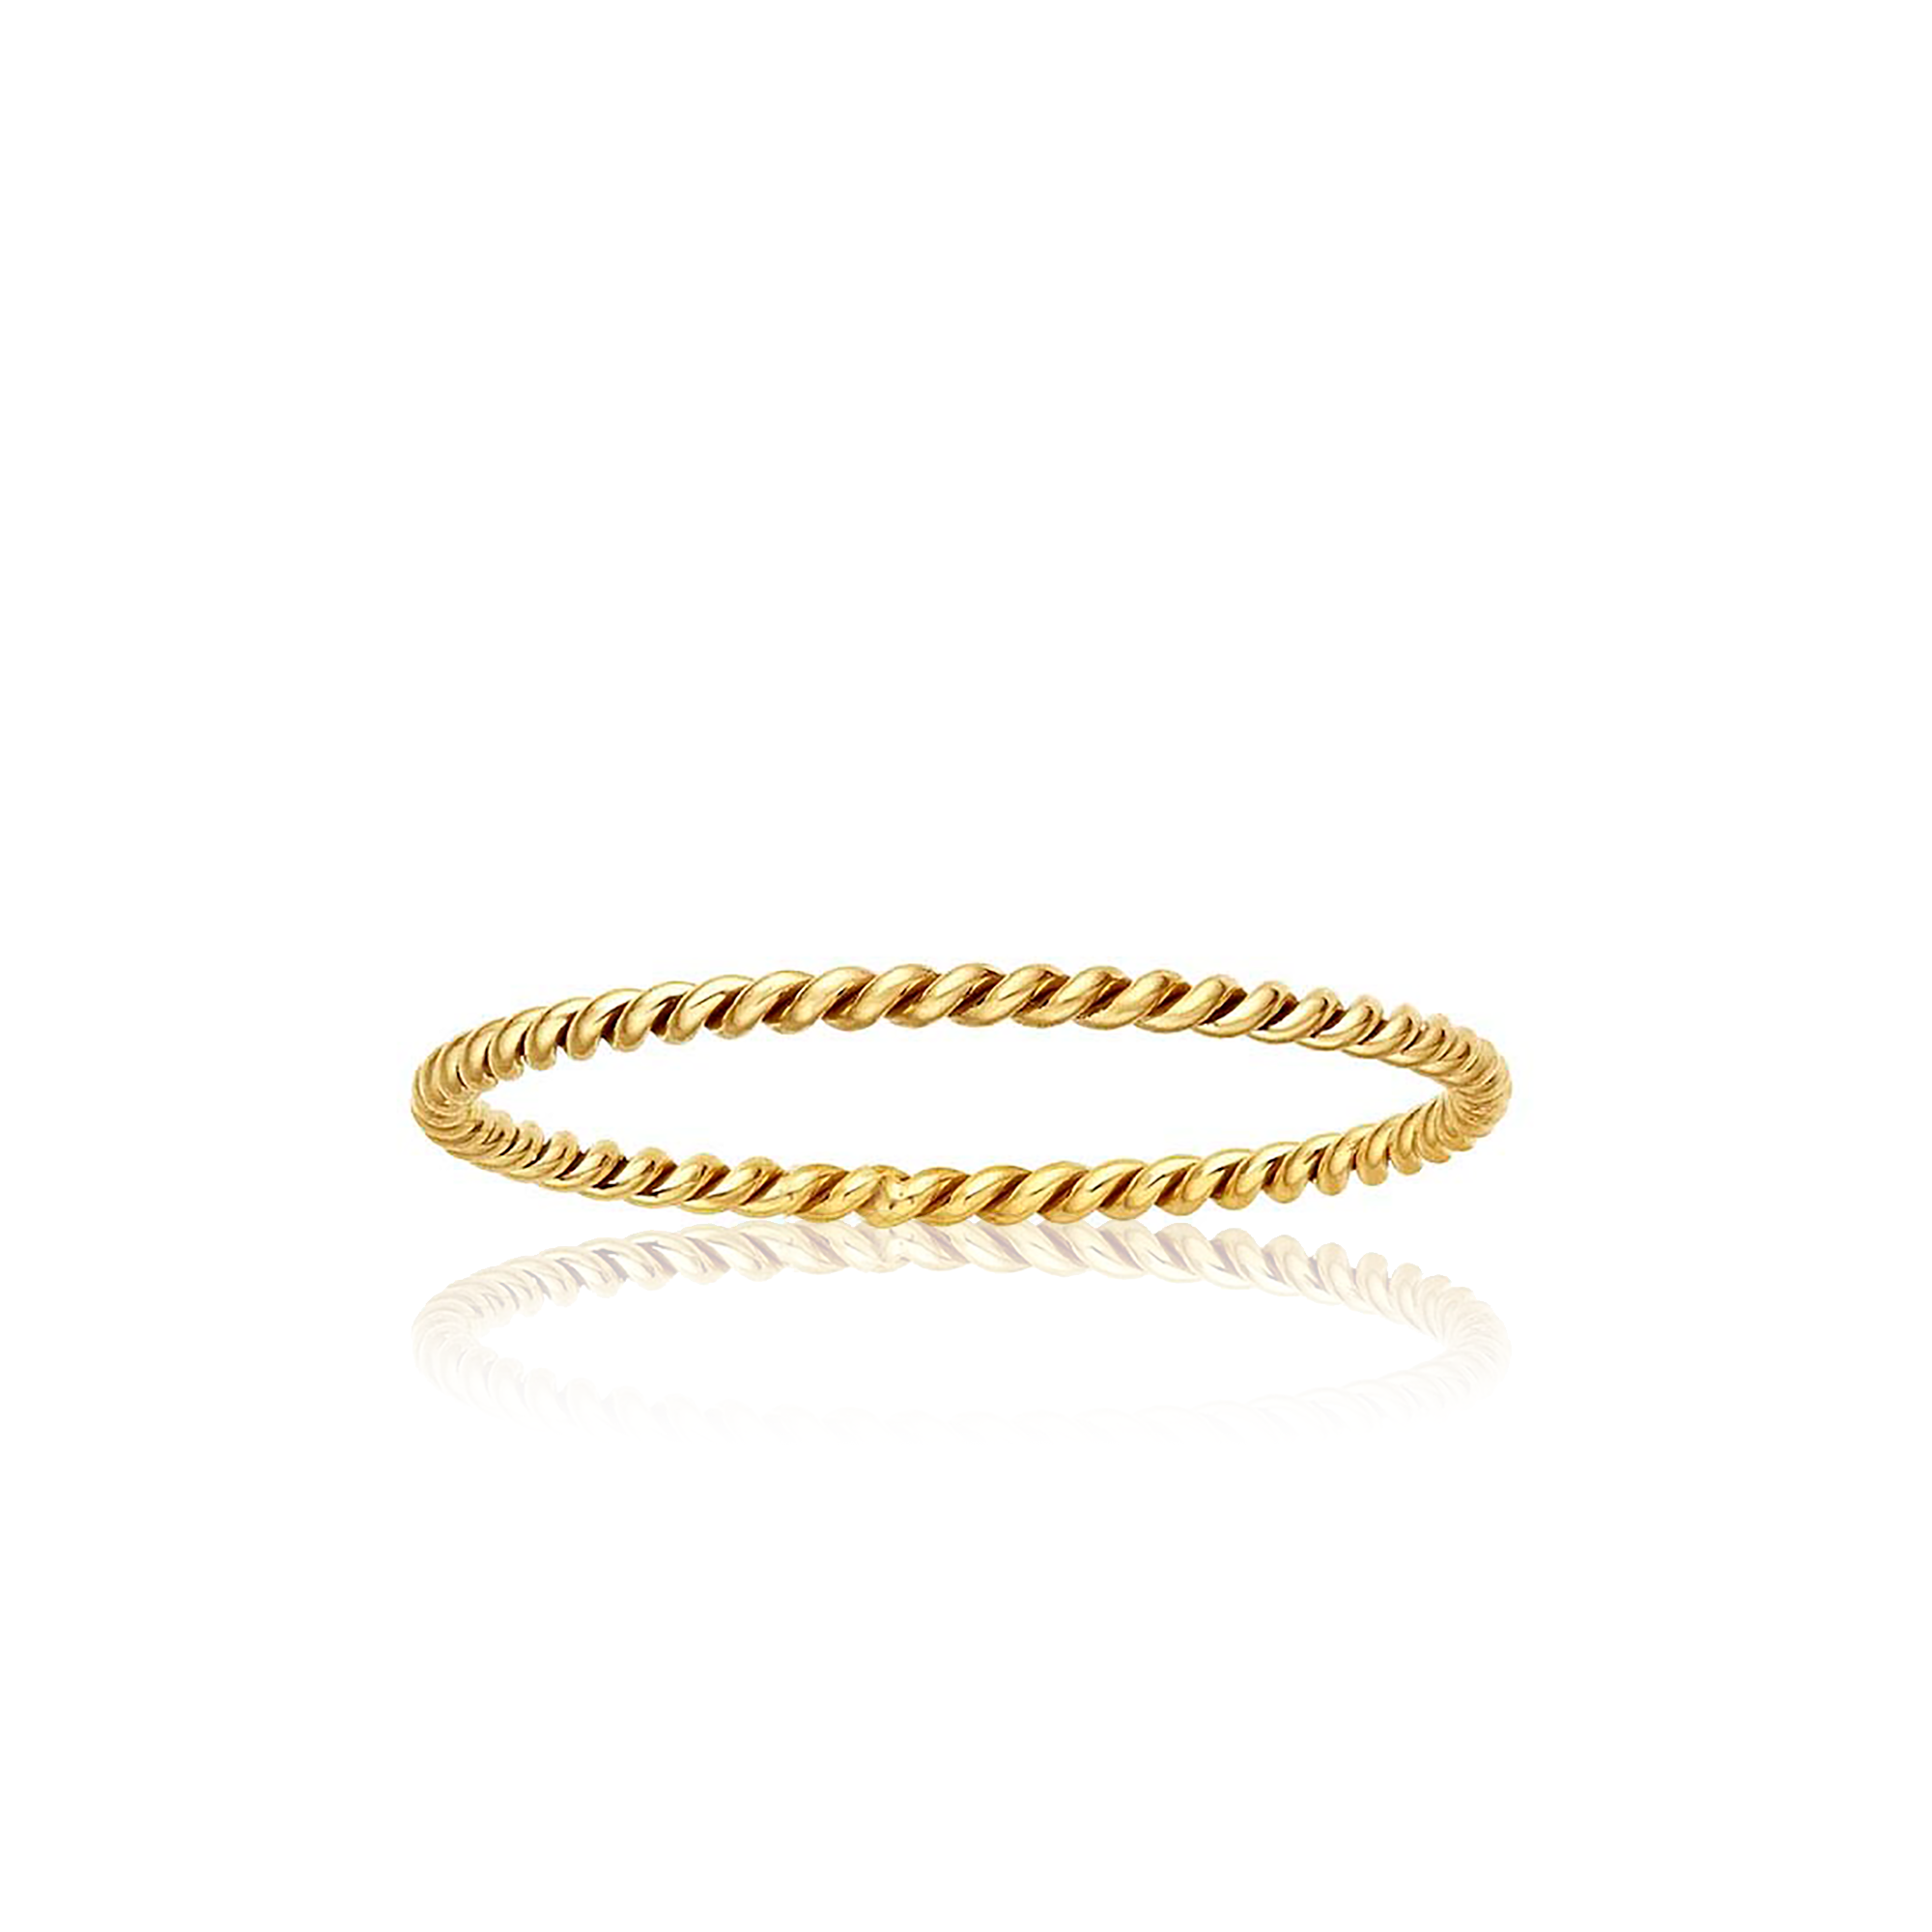 Thin Band Rope Rings Stacker Set, Gold Stackable Rings Gold Vermeil / 6